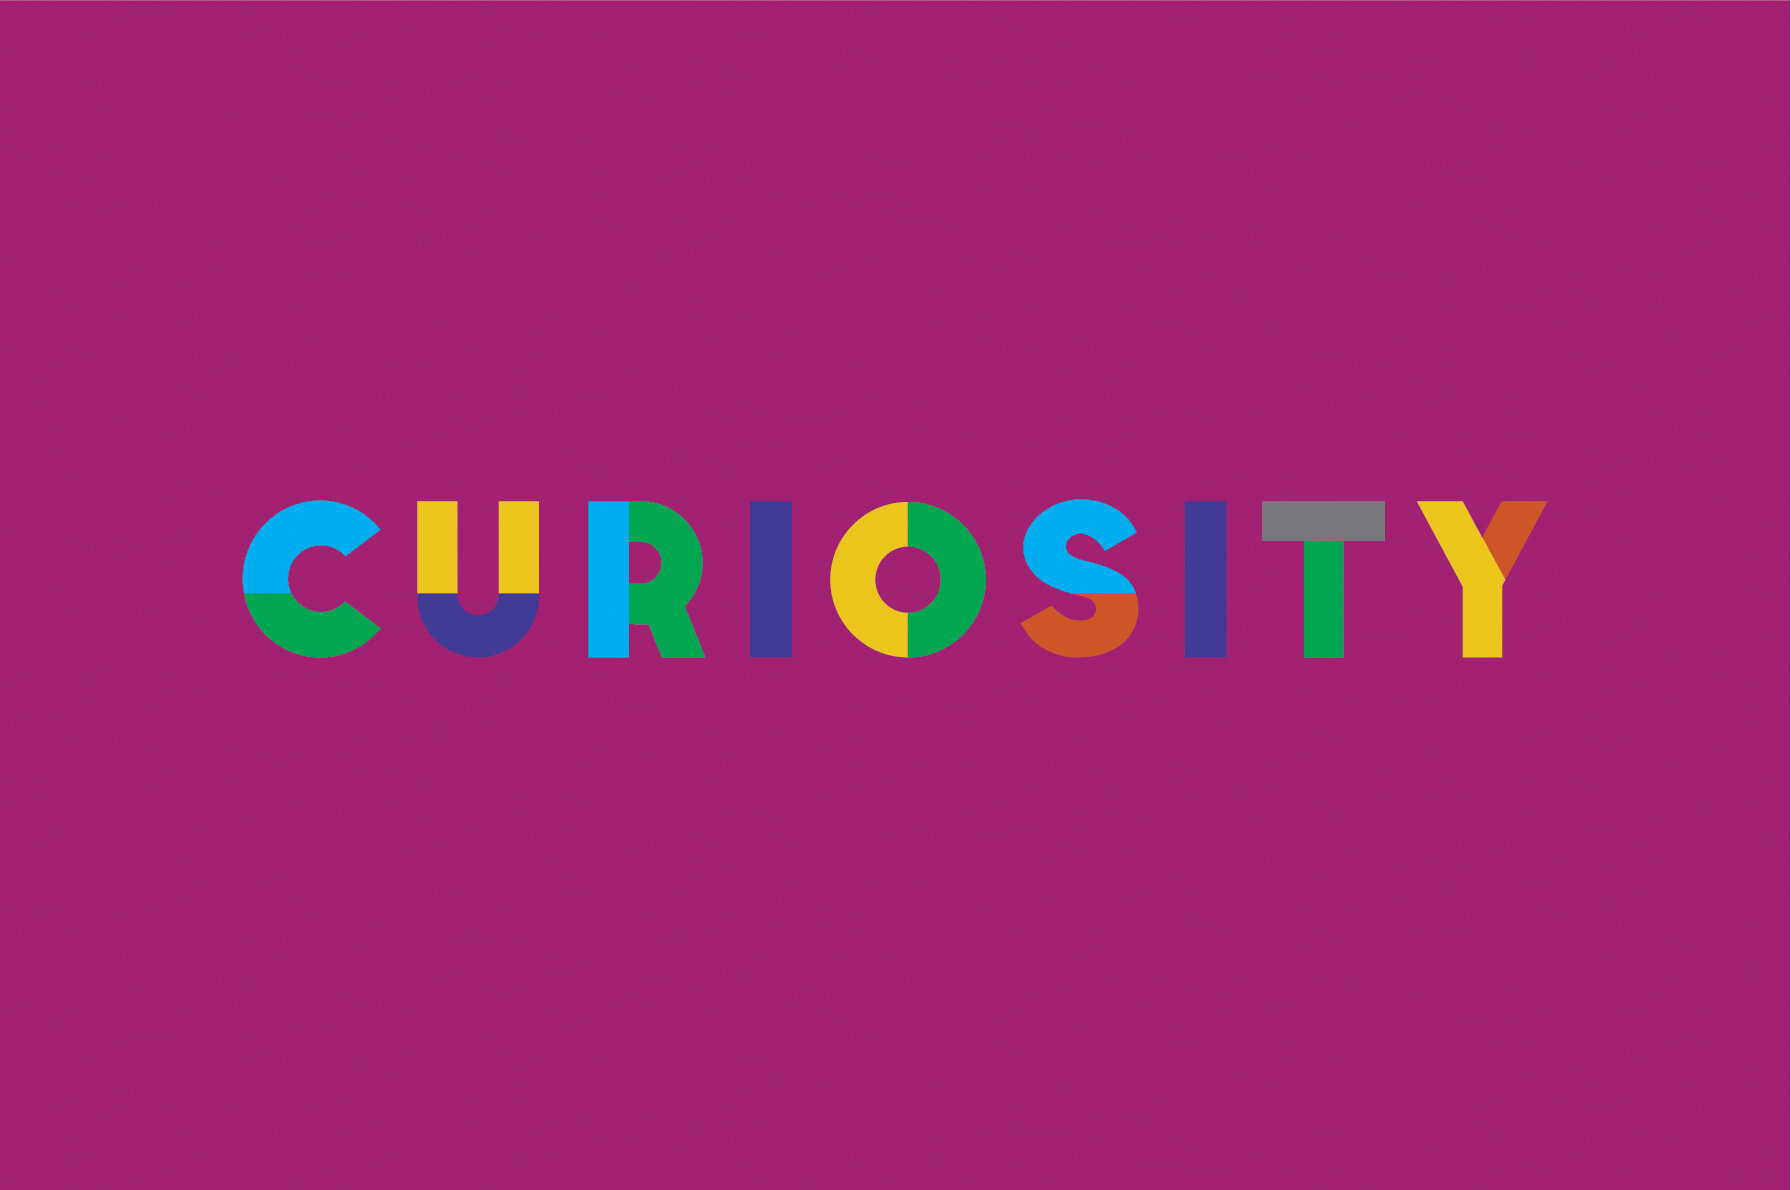 We demonstrate &amp; encourage curiosity to open up and the willingness to learn more.